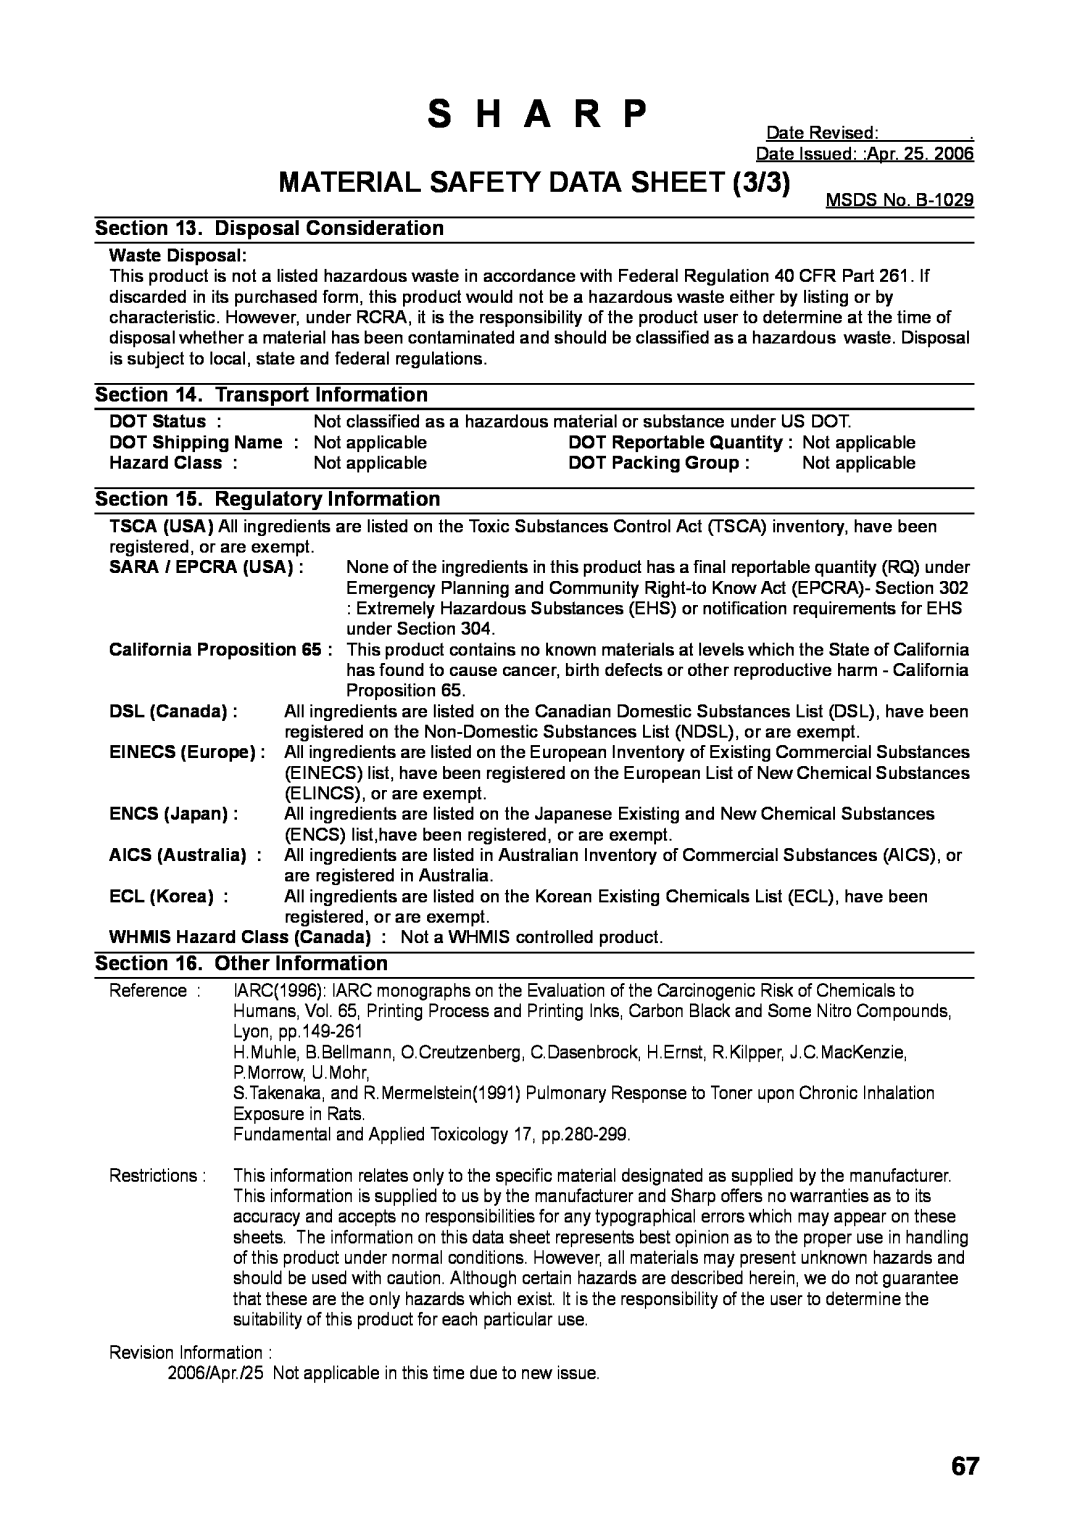 Sharp UX-B800SE operation manual MATERIAL SAFETY DATA SHEET 3/3, S H A R P, Disposal Consideration, Transport Information 